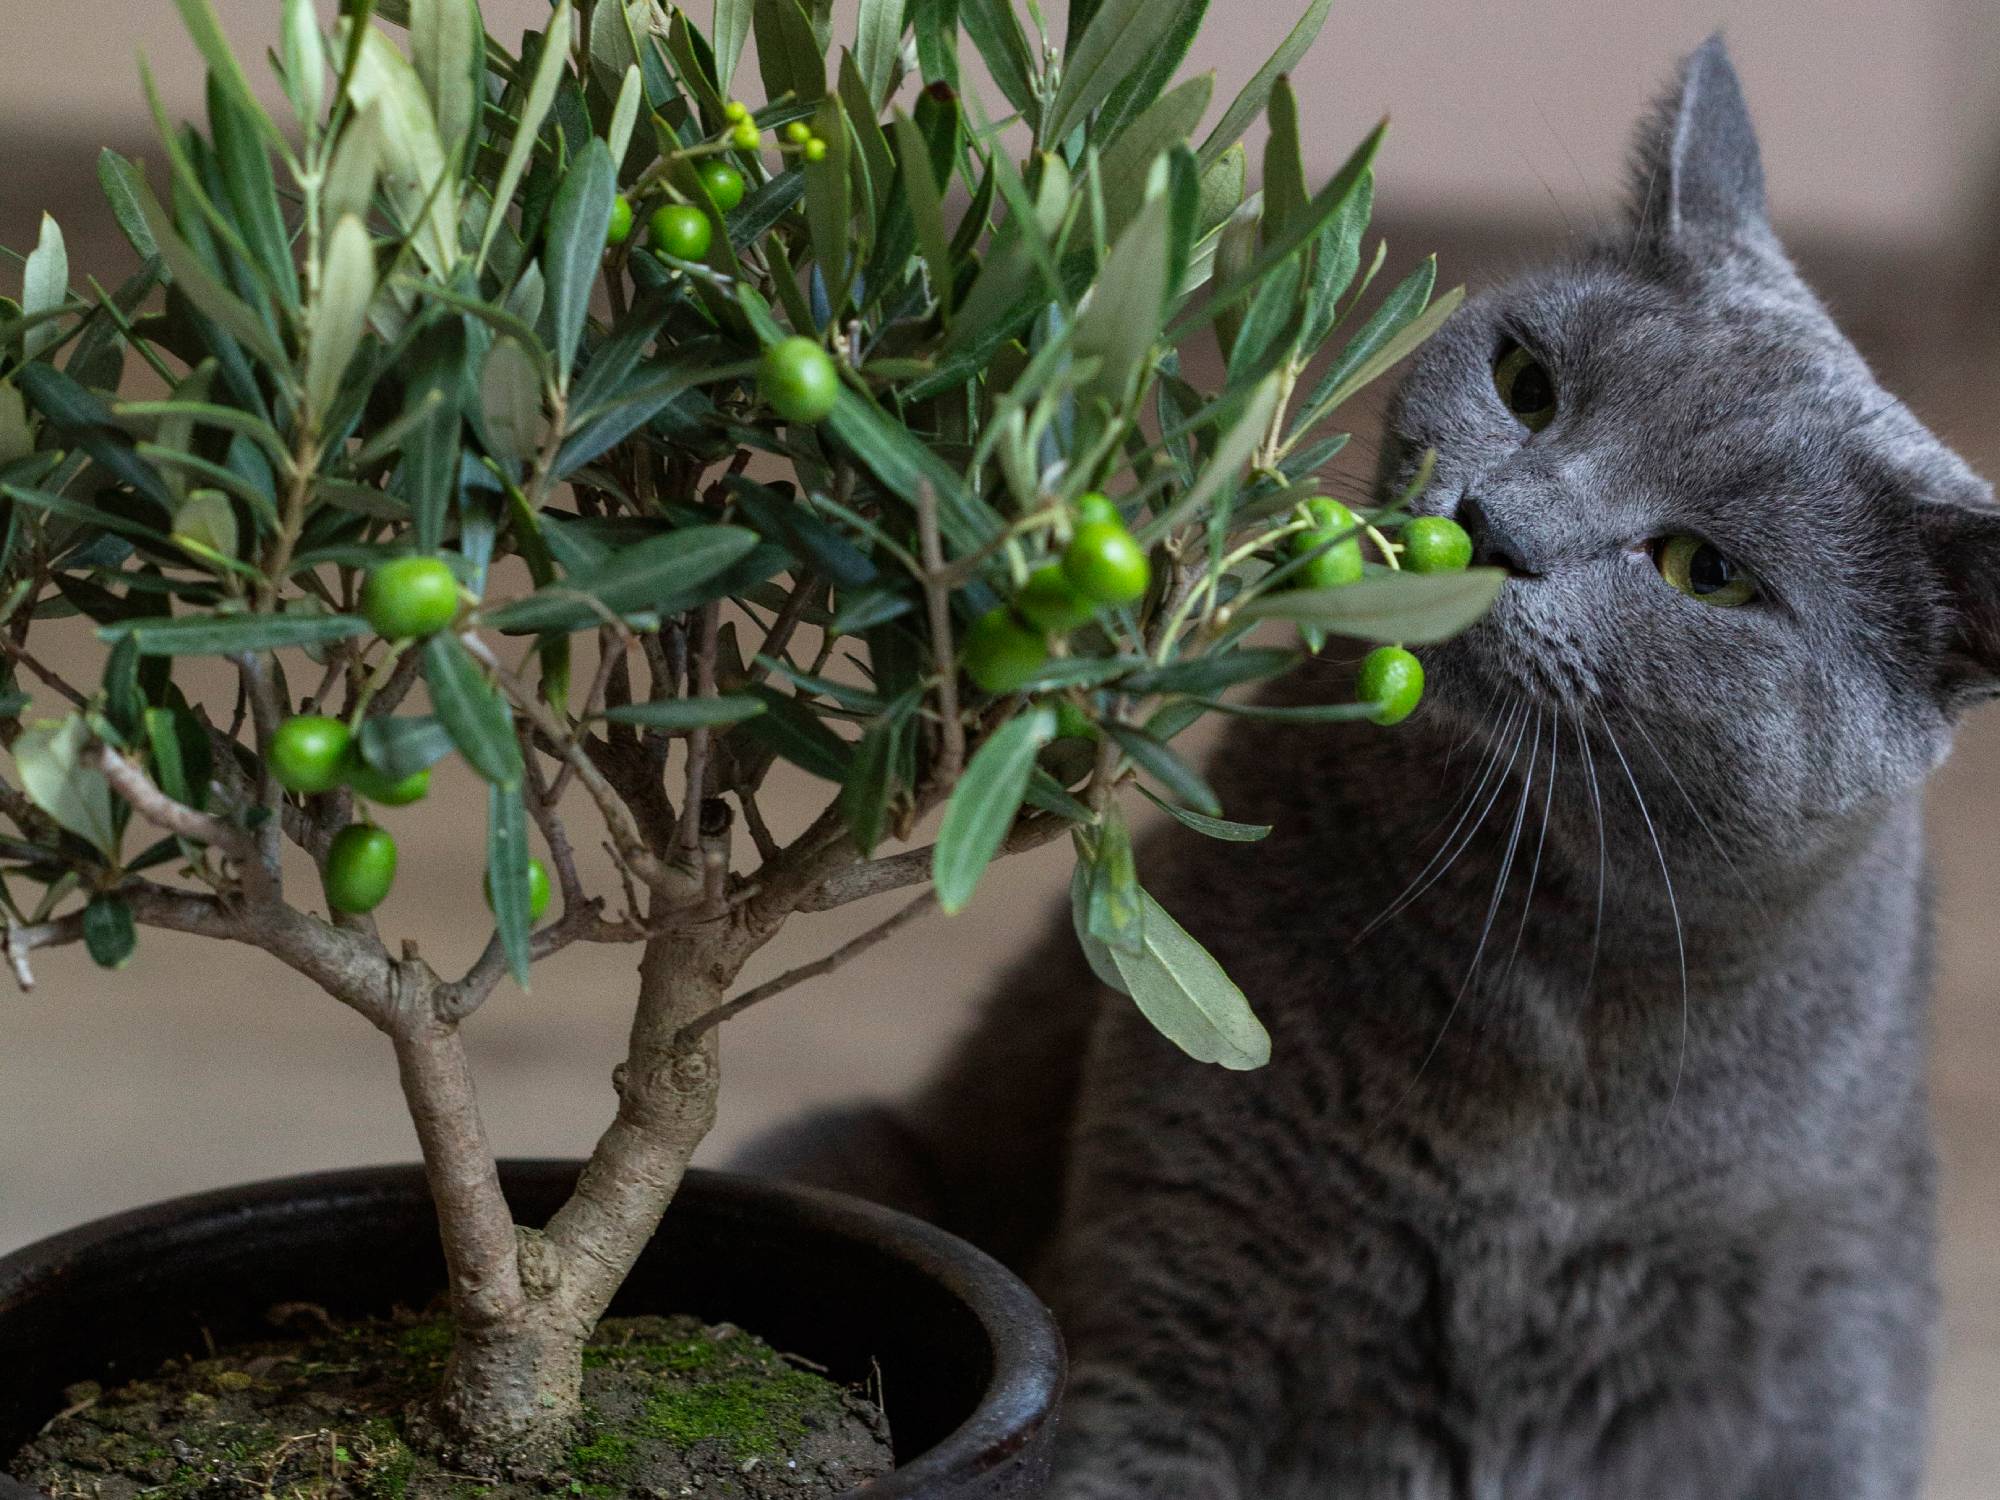 15 Non-Toxic Plants for Dogs and Cats for Greenery Without Worry